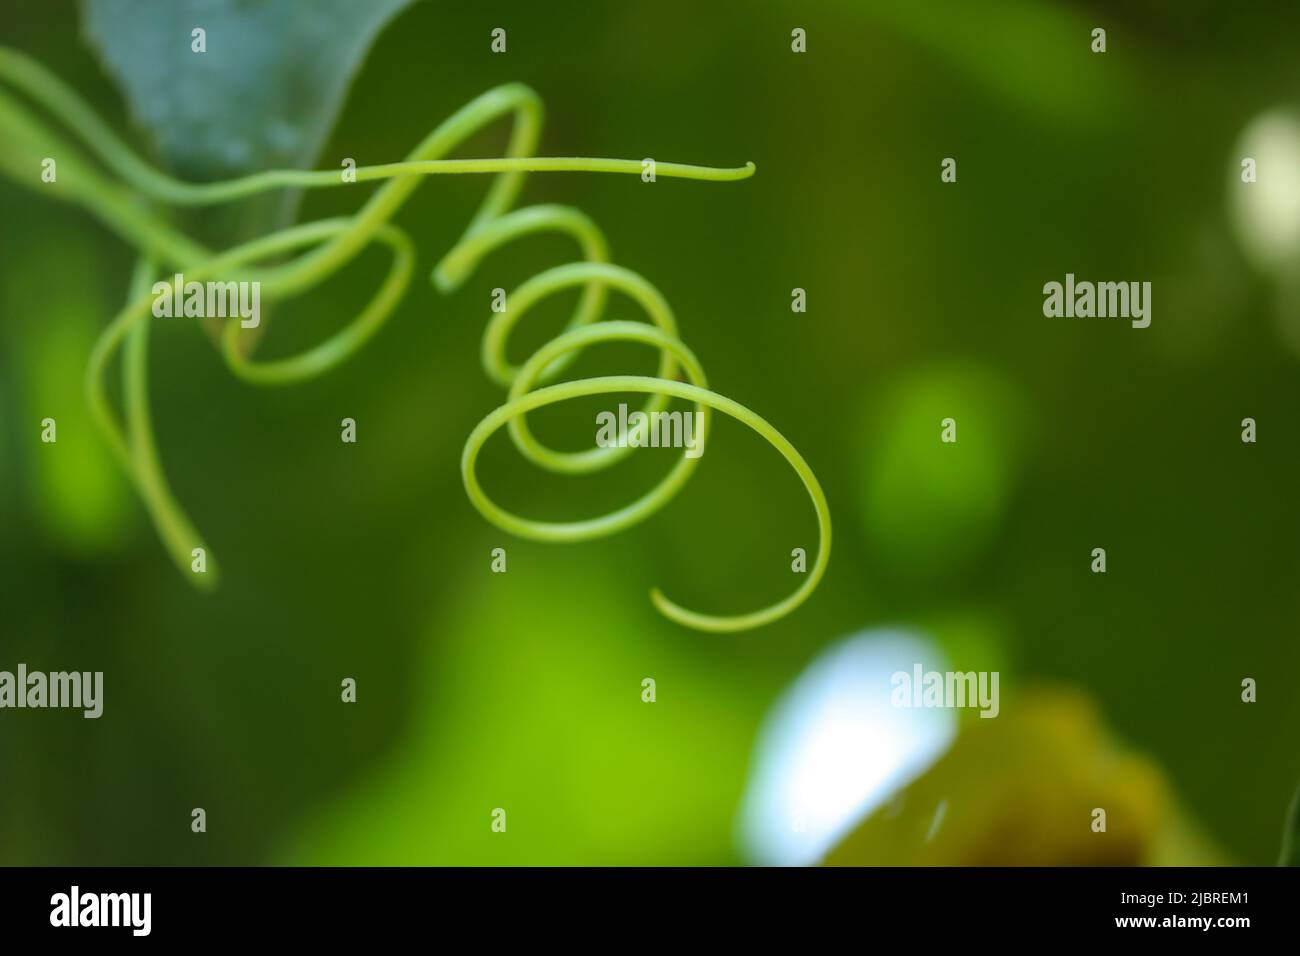 coiling Spiral supportive part, tendril of cucumber plant. Stock Photo